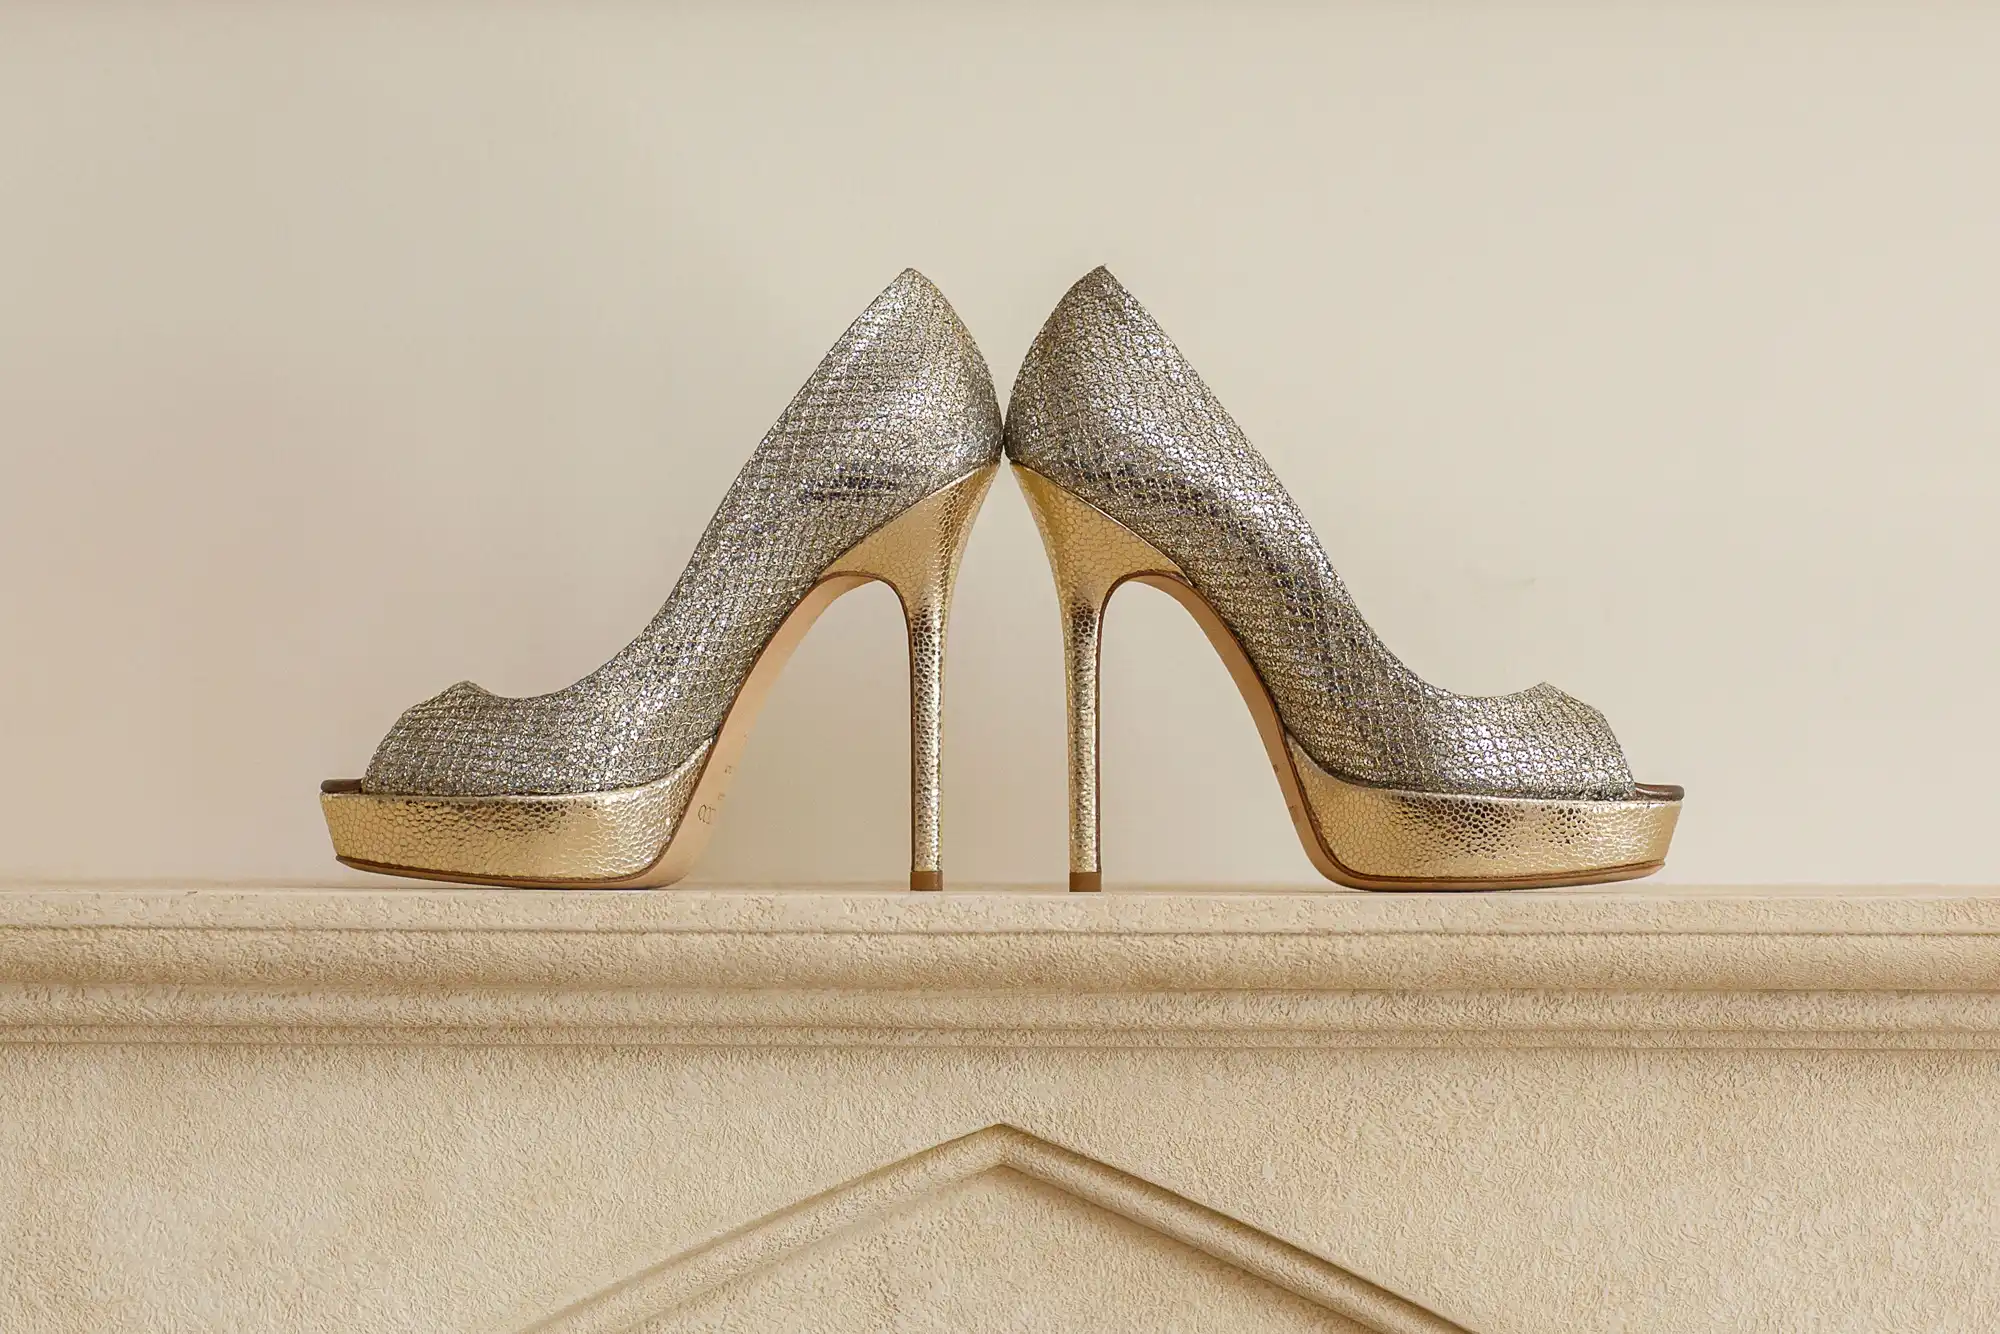 A pair of glittery silver high-heeled shoes with peep toes, displayed on a cream-colored ledge.